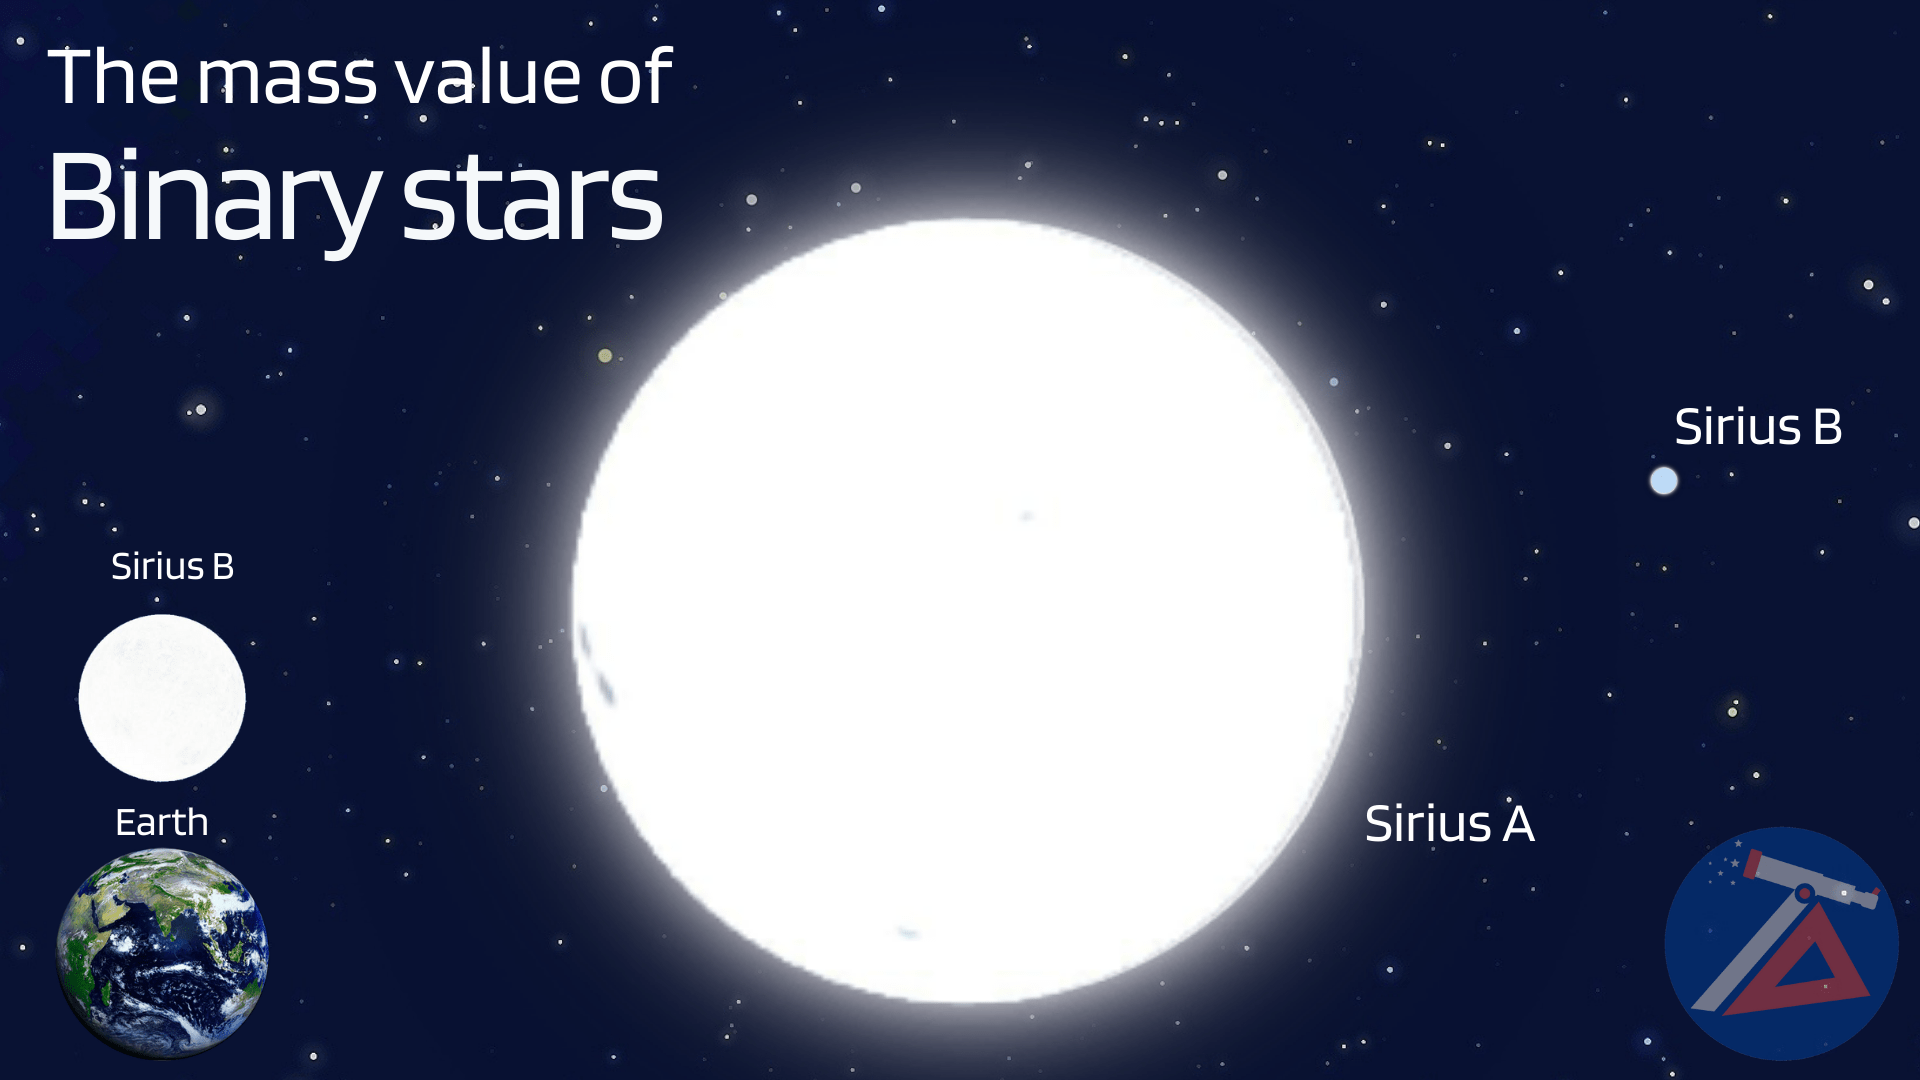 How to find the mass value of binary stars.